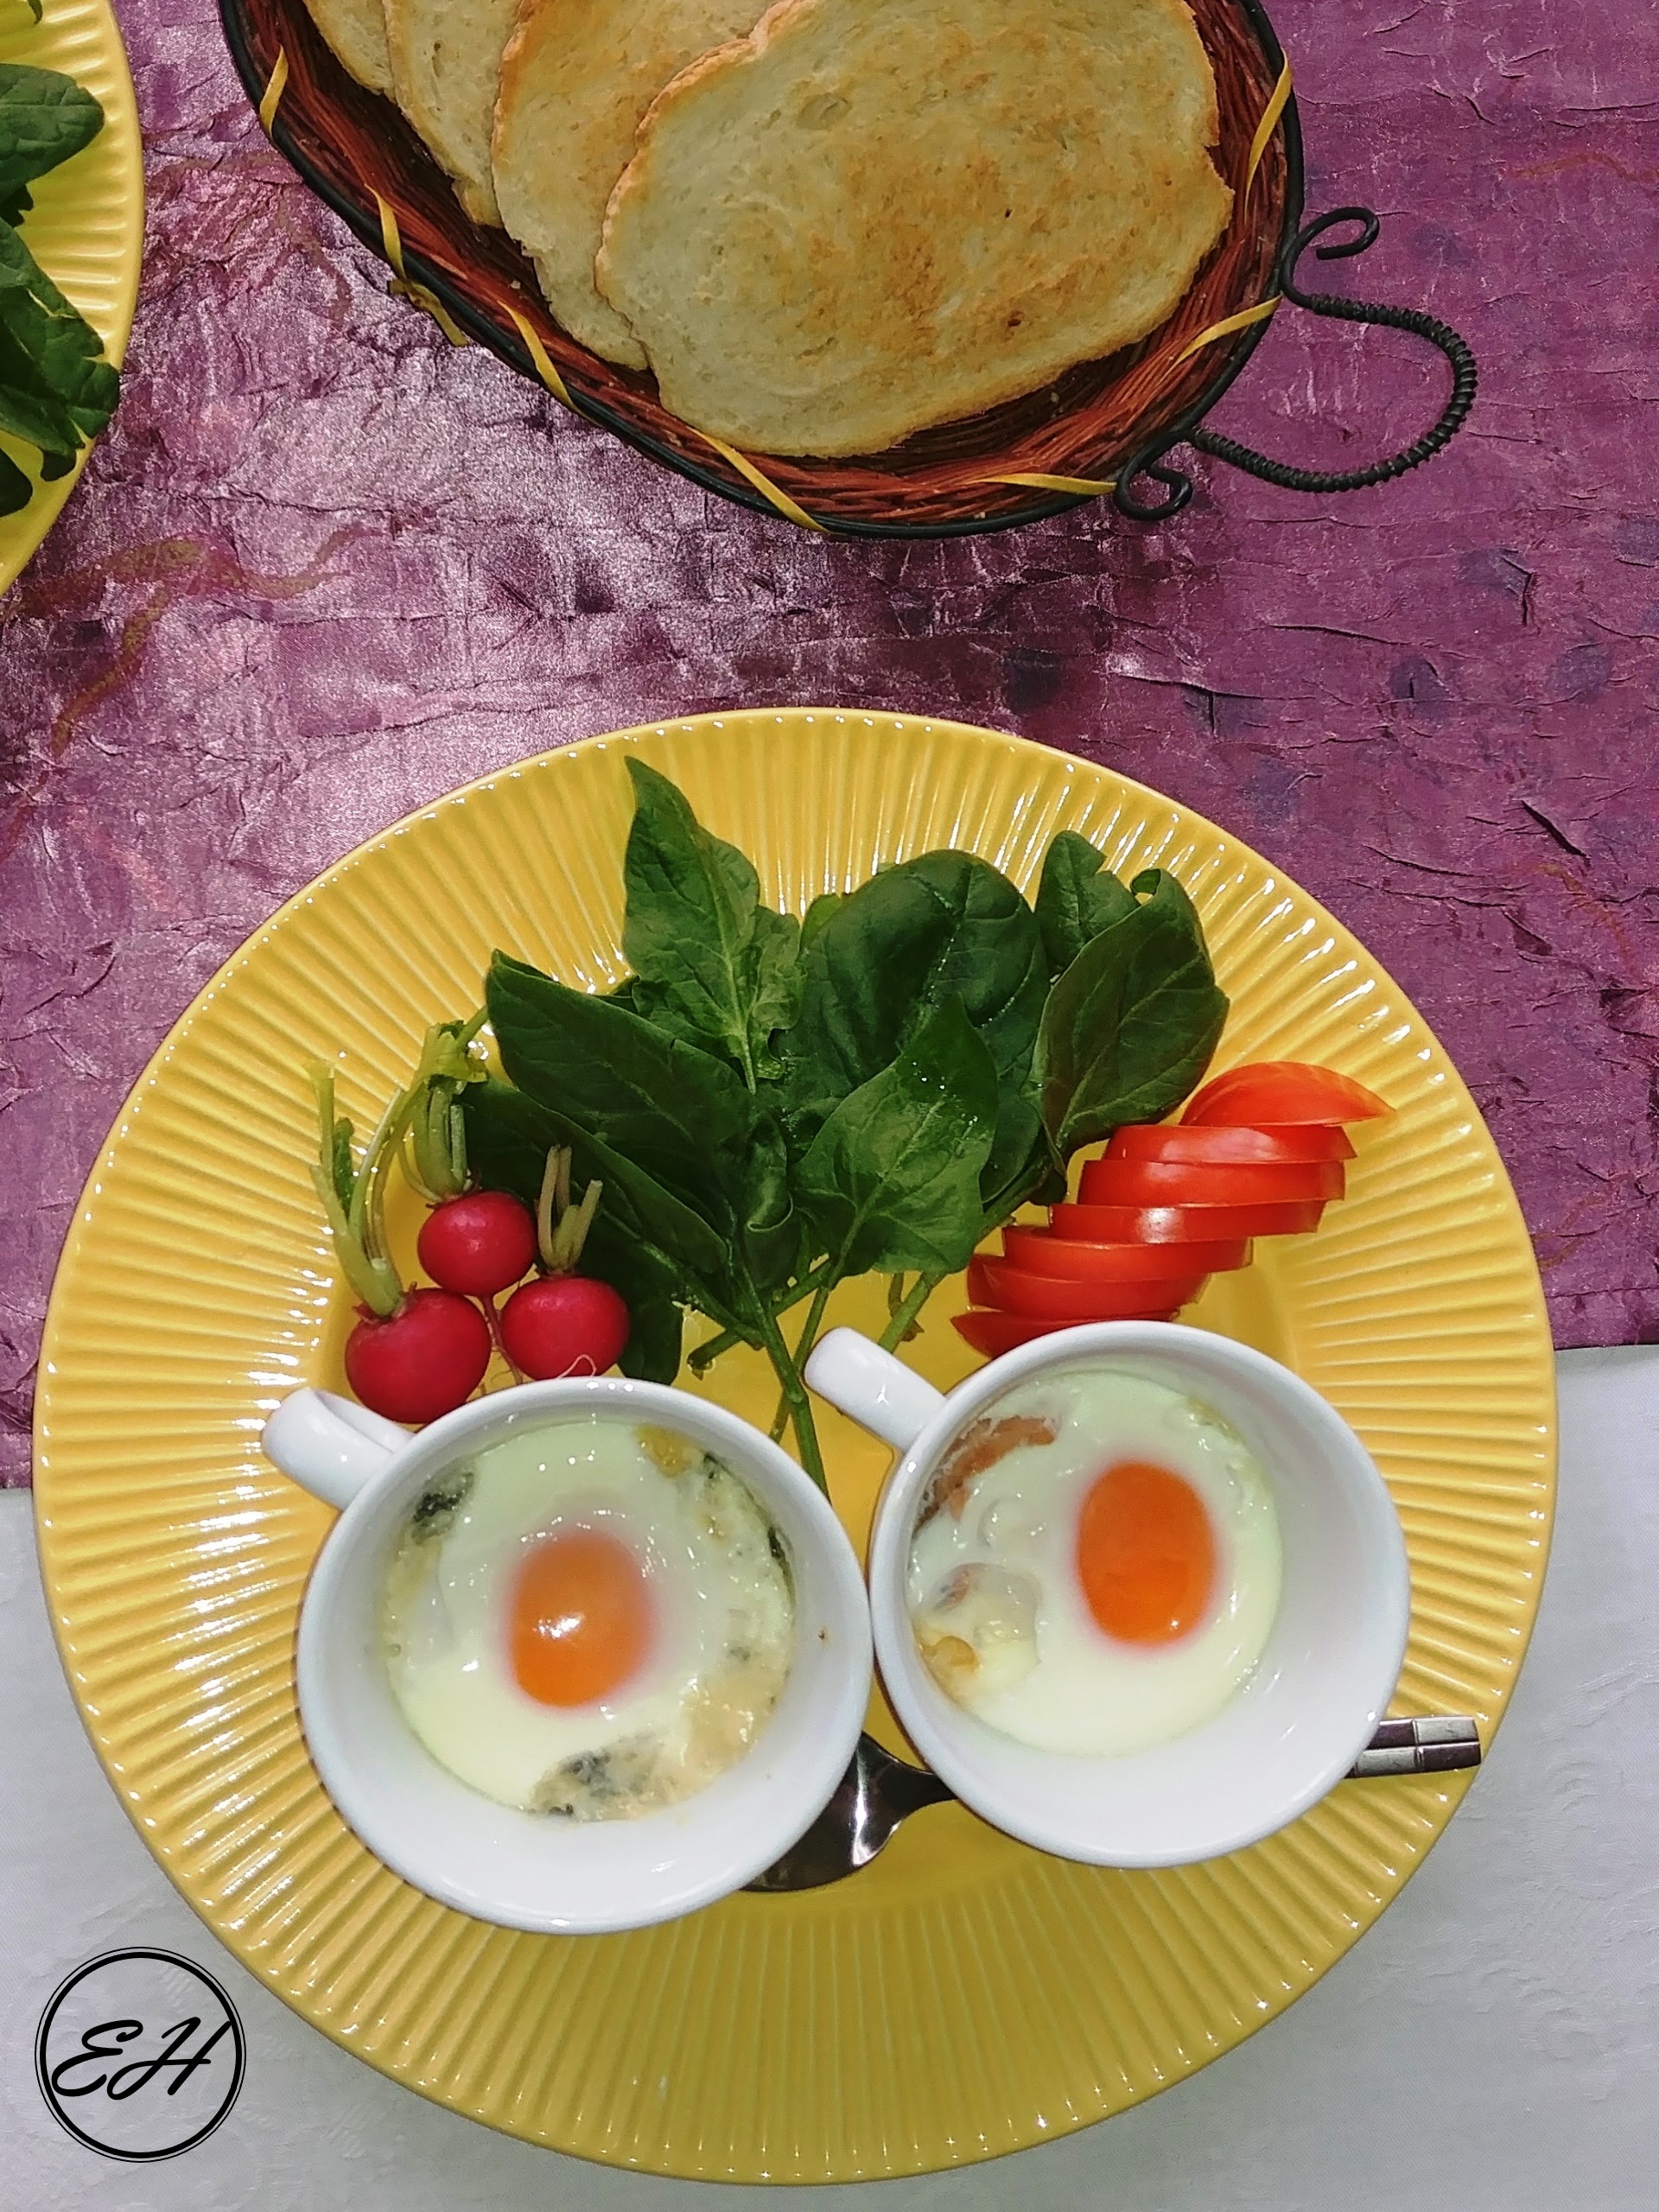 Ouef en cocotte - (Backed Eggs) with Salmon and Blue Cheese - Extravagance House